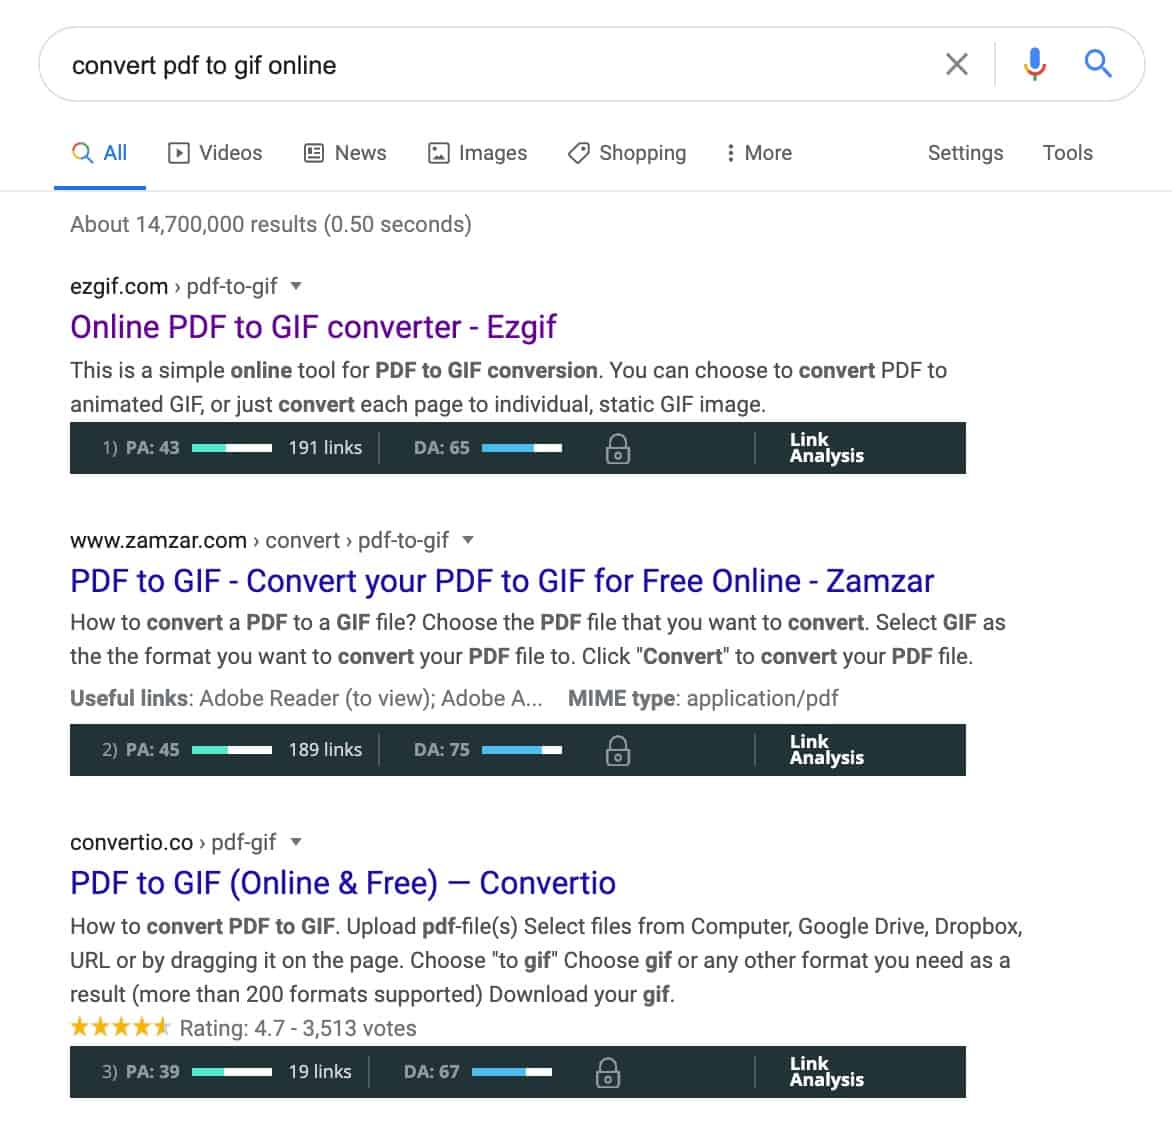 Sample SERP for Tools